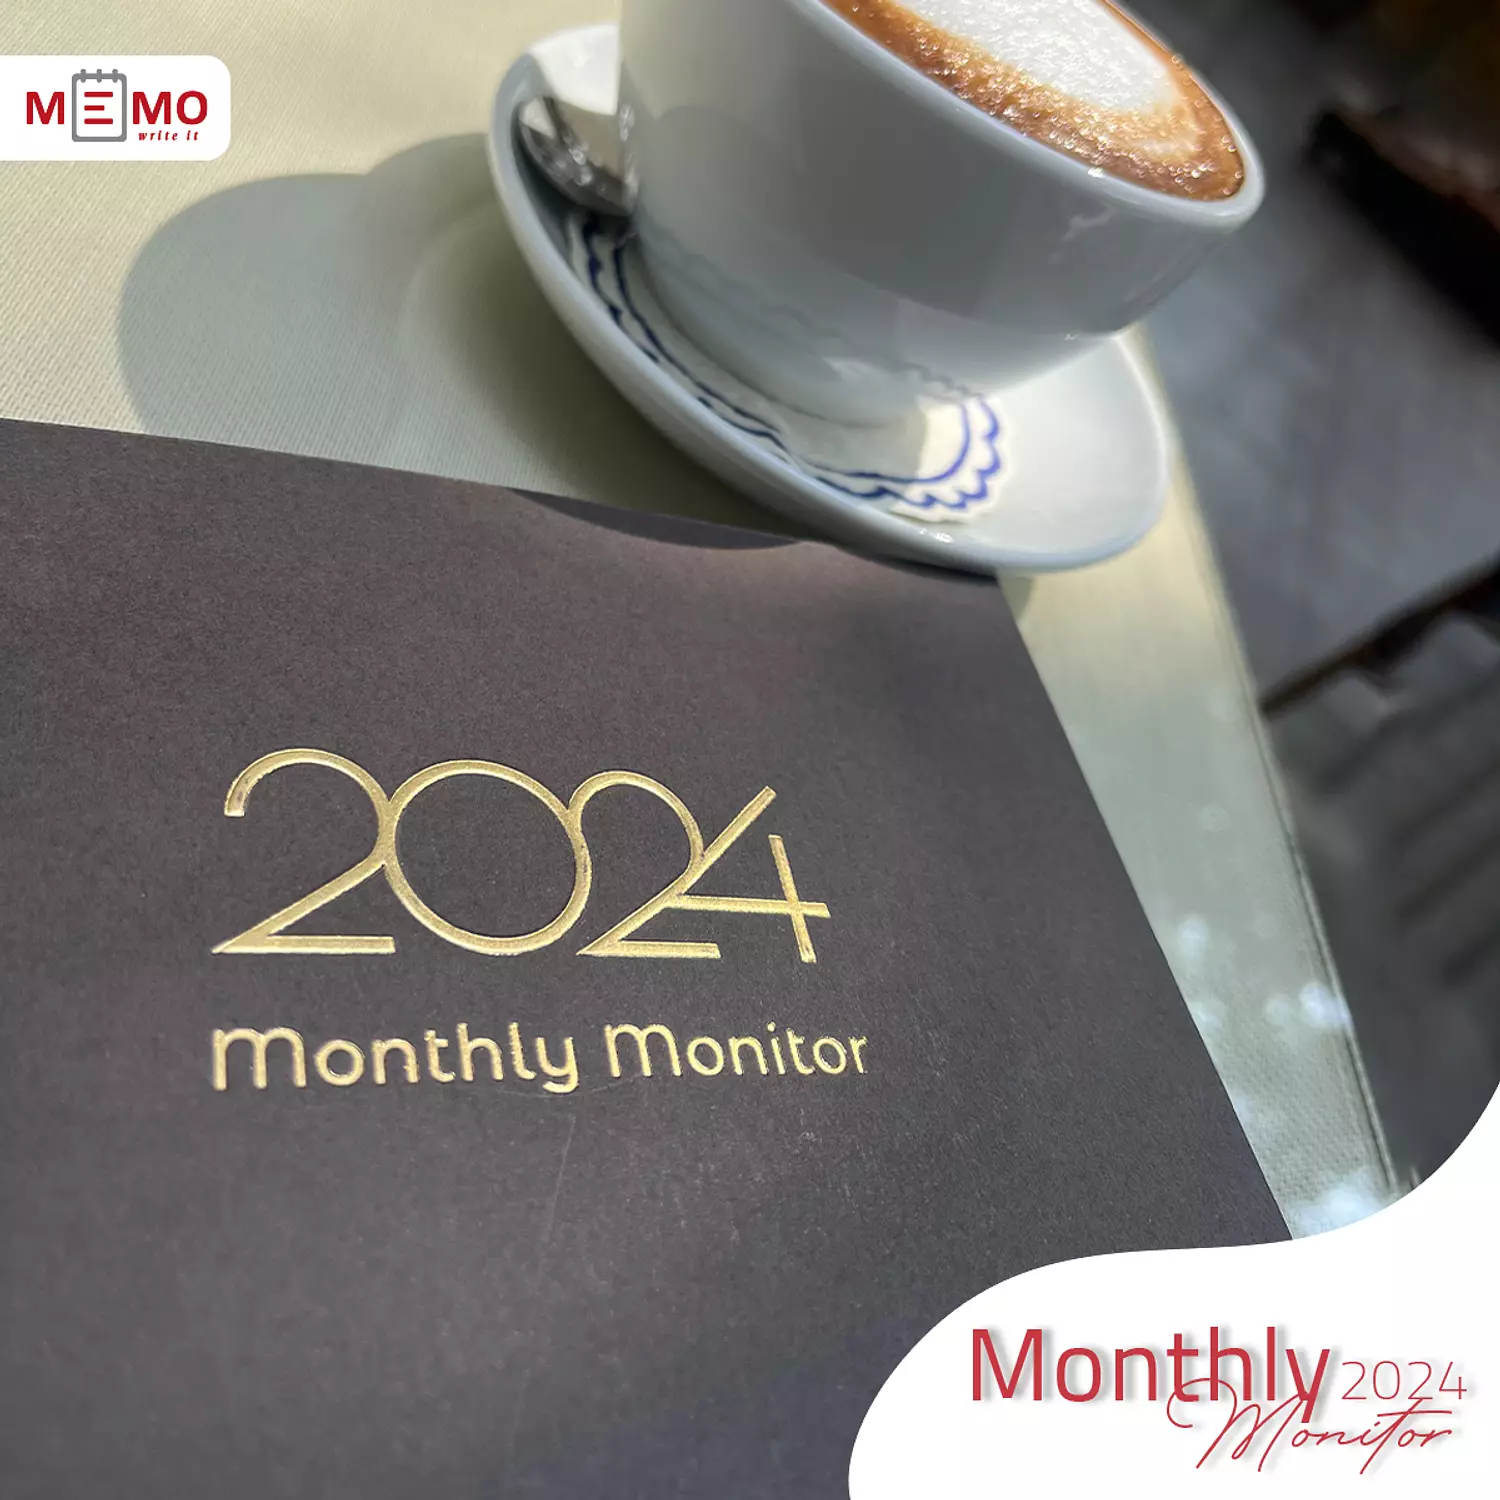 Memo Monthly Monitor 2024 1